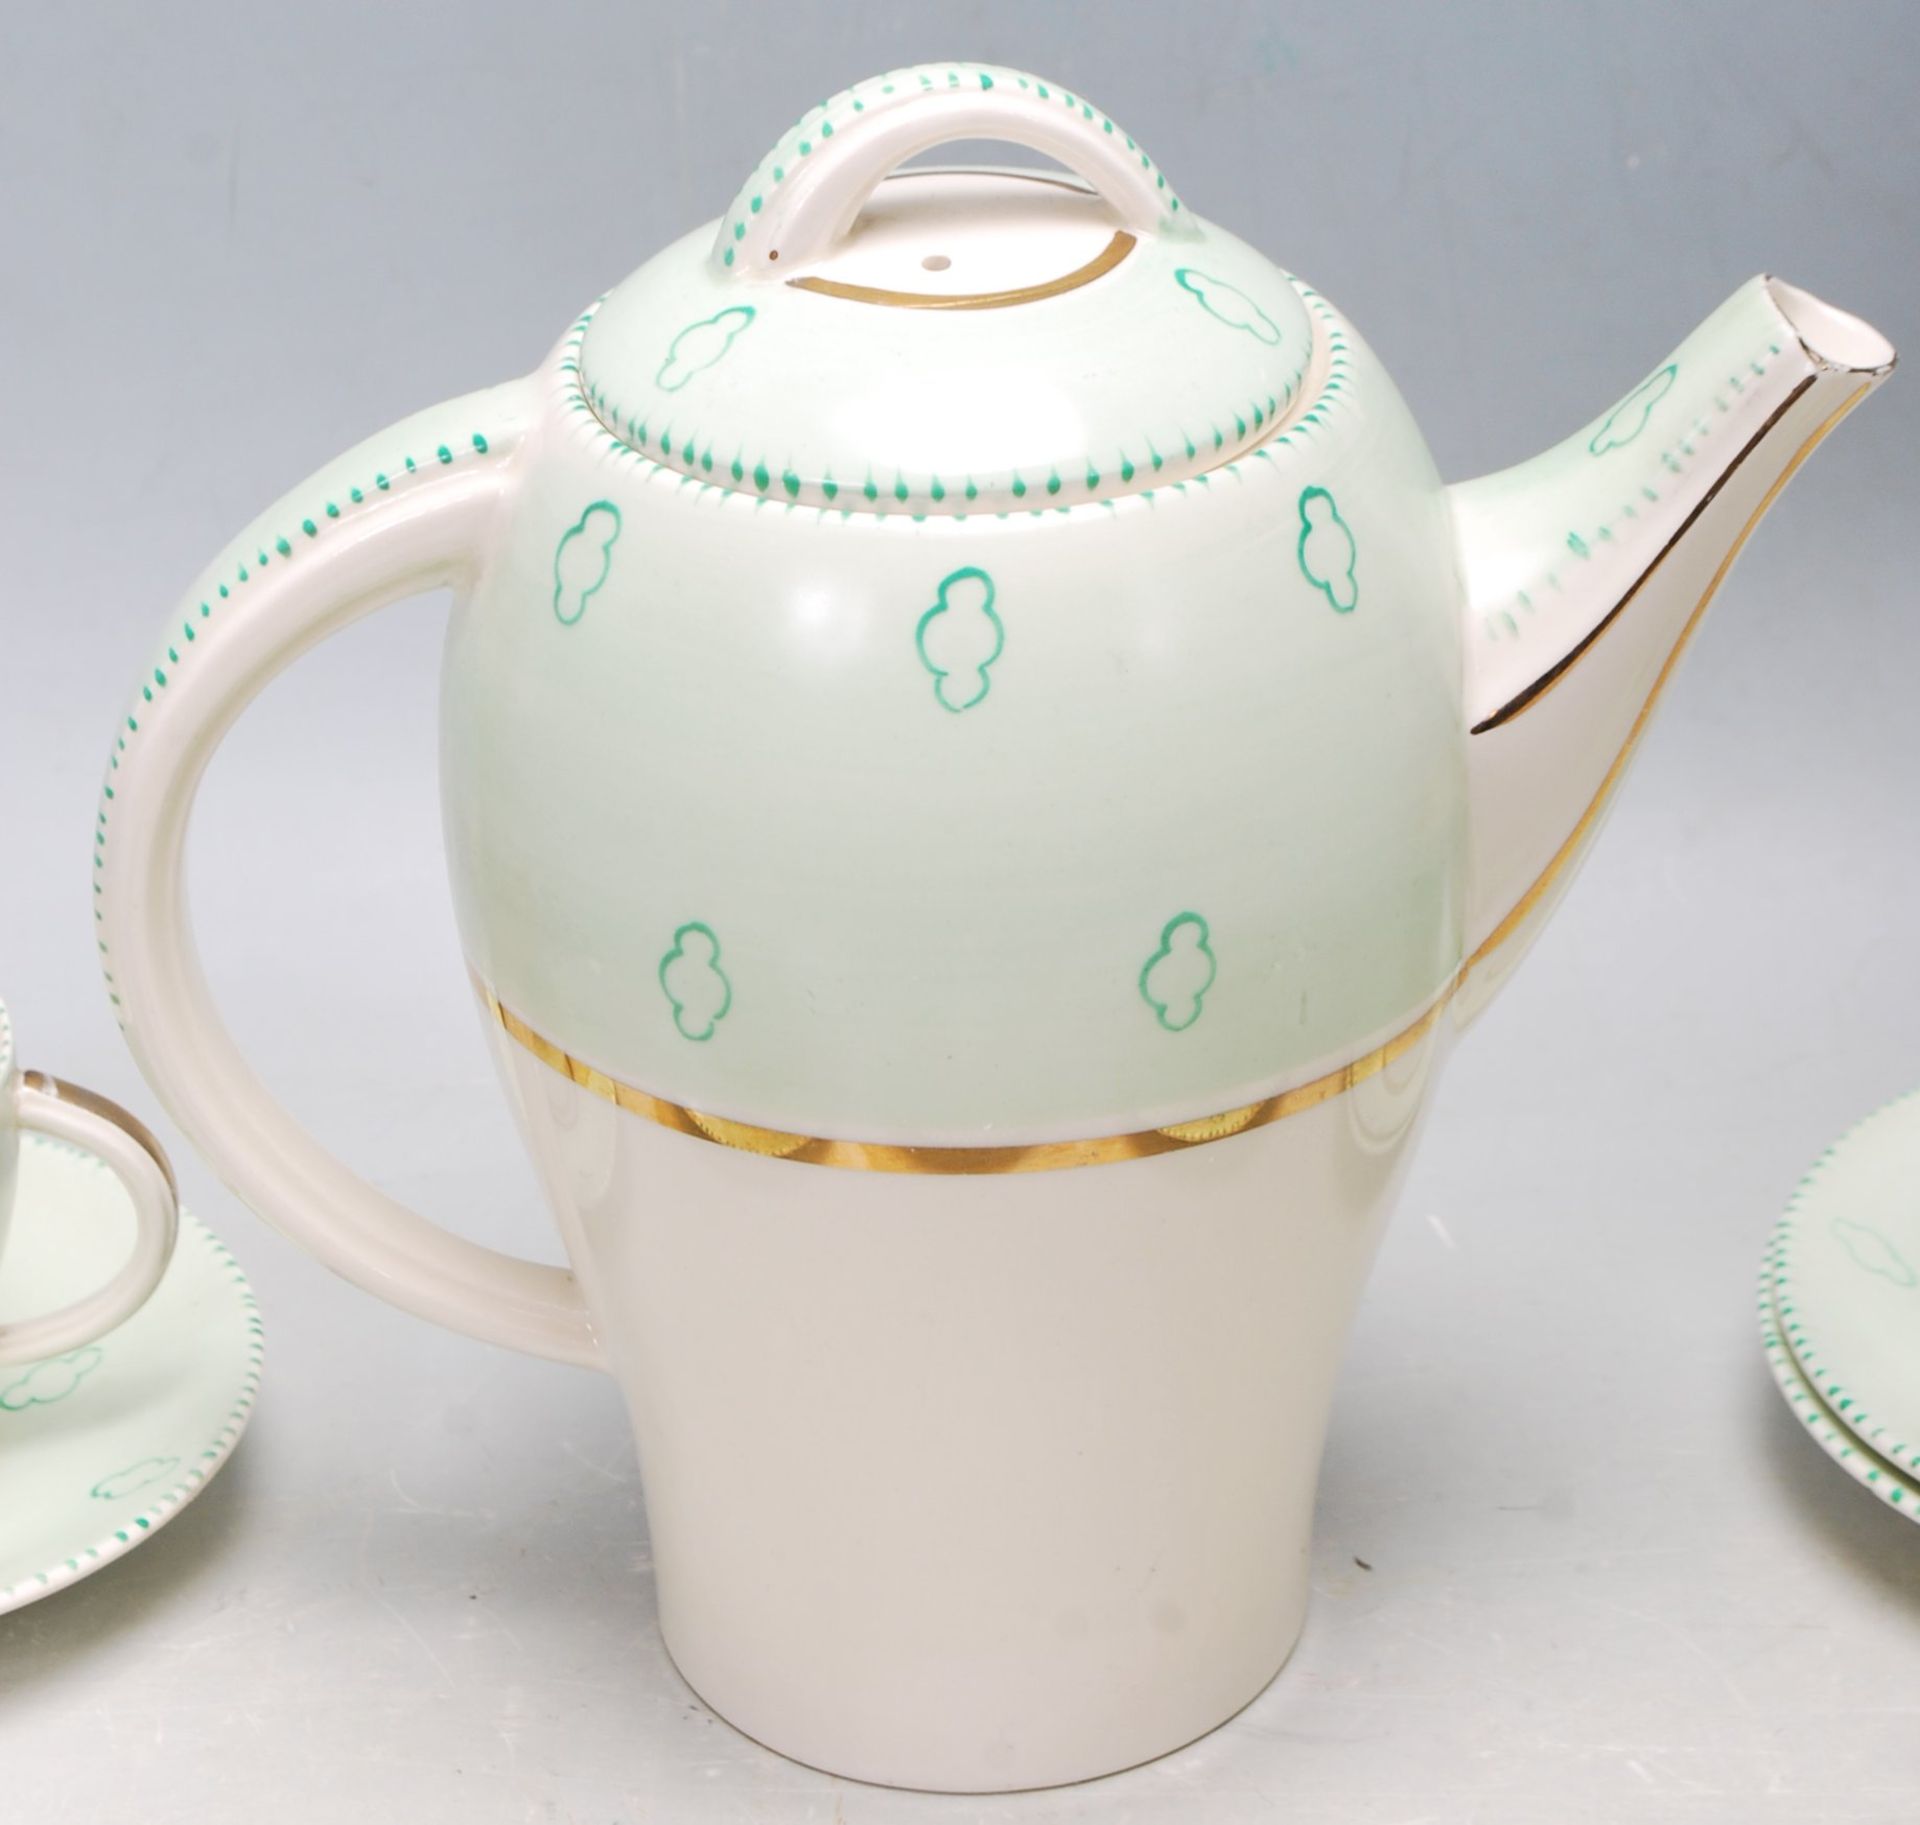 EARLY 20TH CENTURY ART DECO TAMSWARE TEA SERVICE - Image 8 of 10